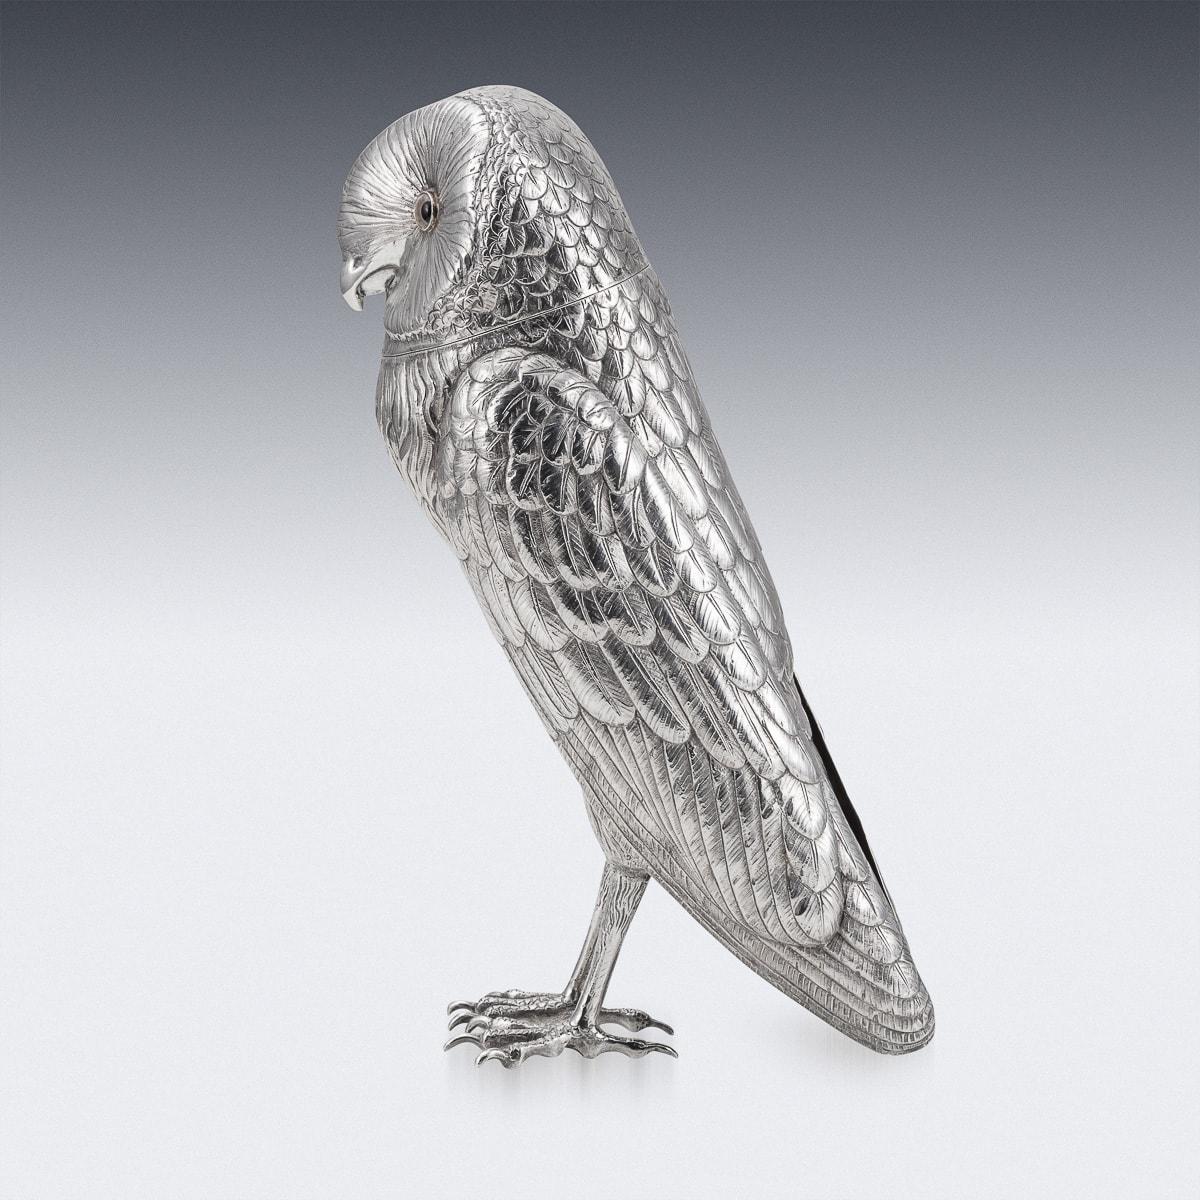 Antique late-19th Century Victorian solid silver novelty cocktail shaker, in a form of an owl, set with glass eyes and removable head. Hallmarked English silver (925 standard), London, year 1898 (c), Foreign (F), Importer SBL (Samuel Boyce (or Boaz)